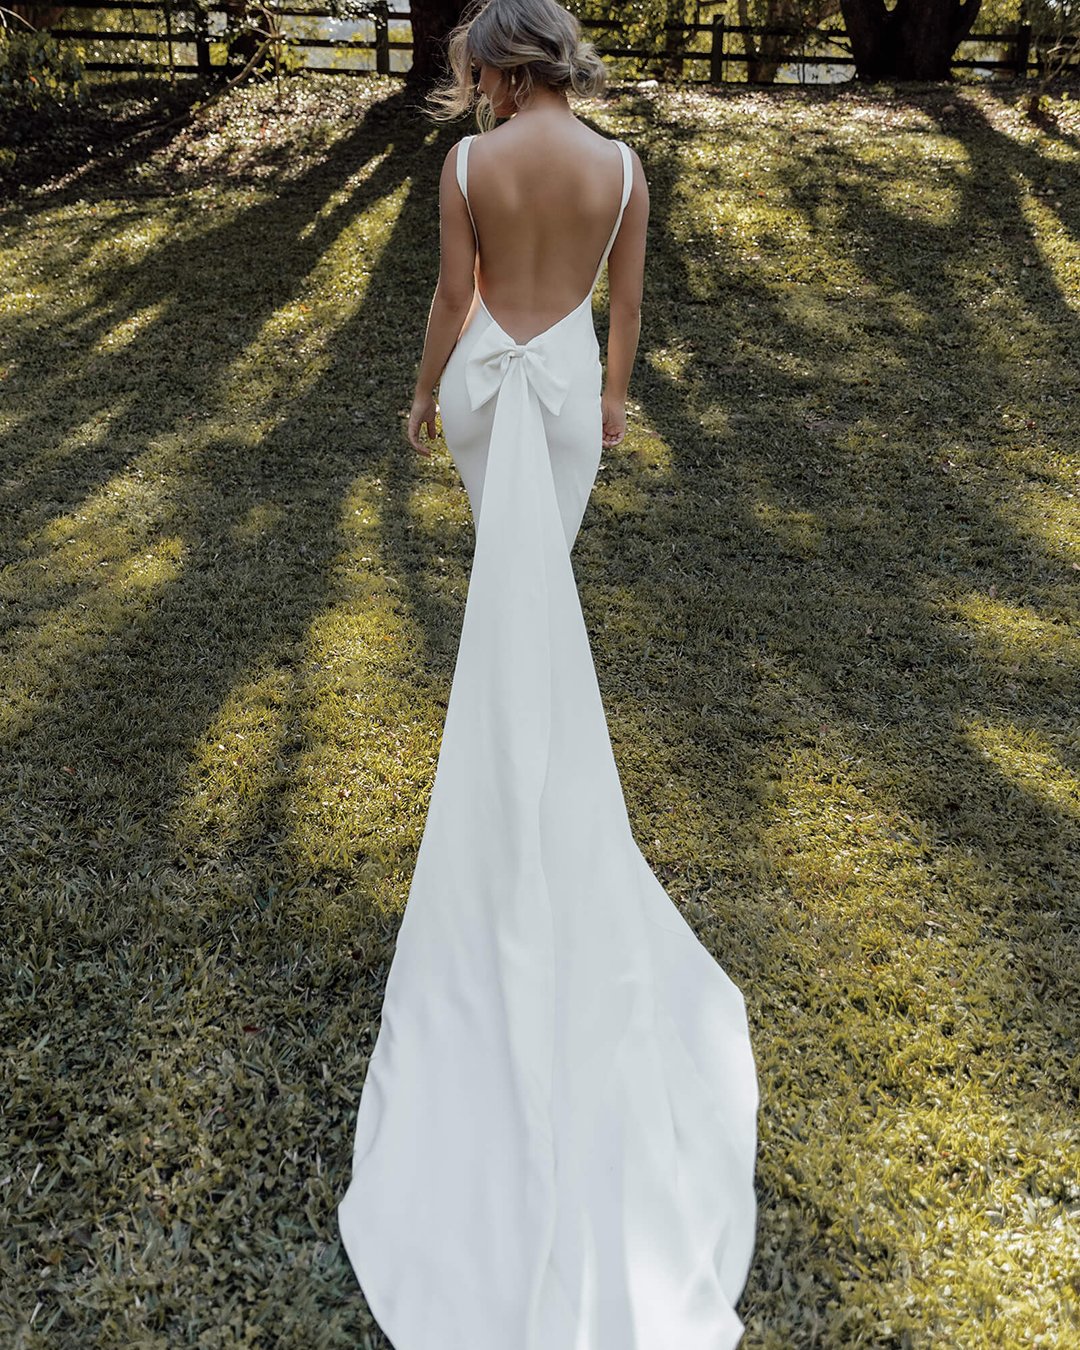 sexy wedding dresses ideas simple backless with bow boho grace